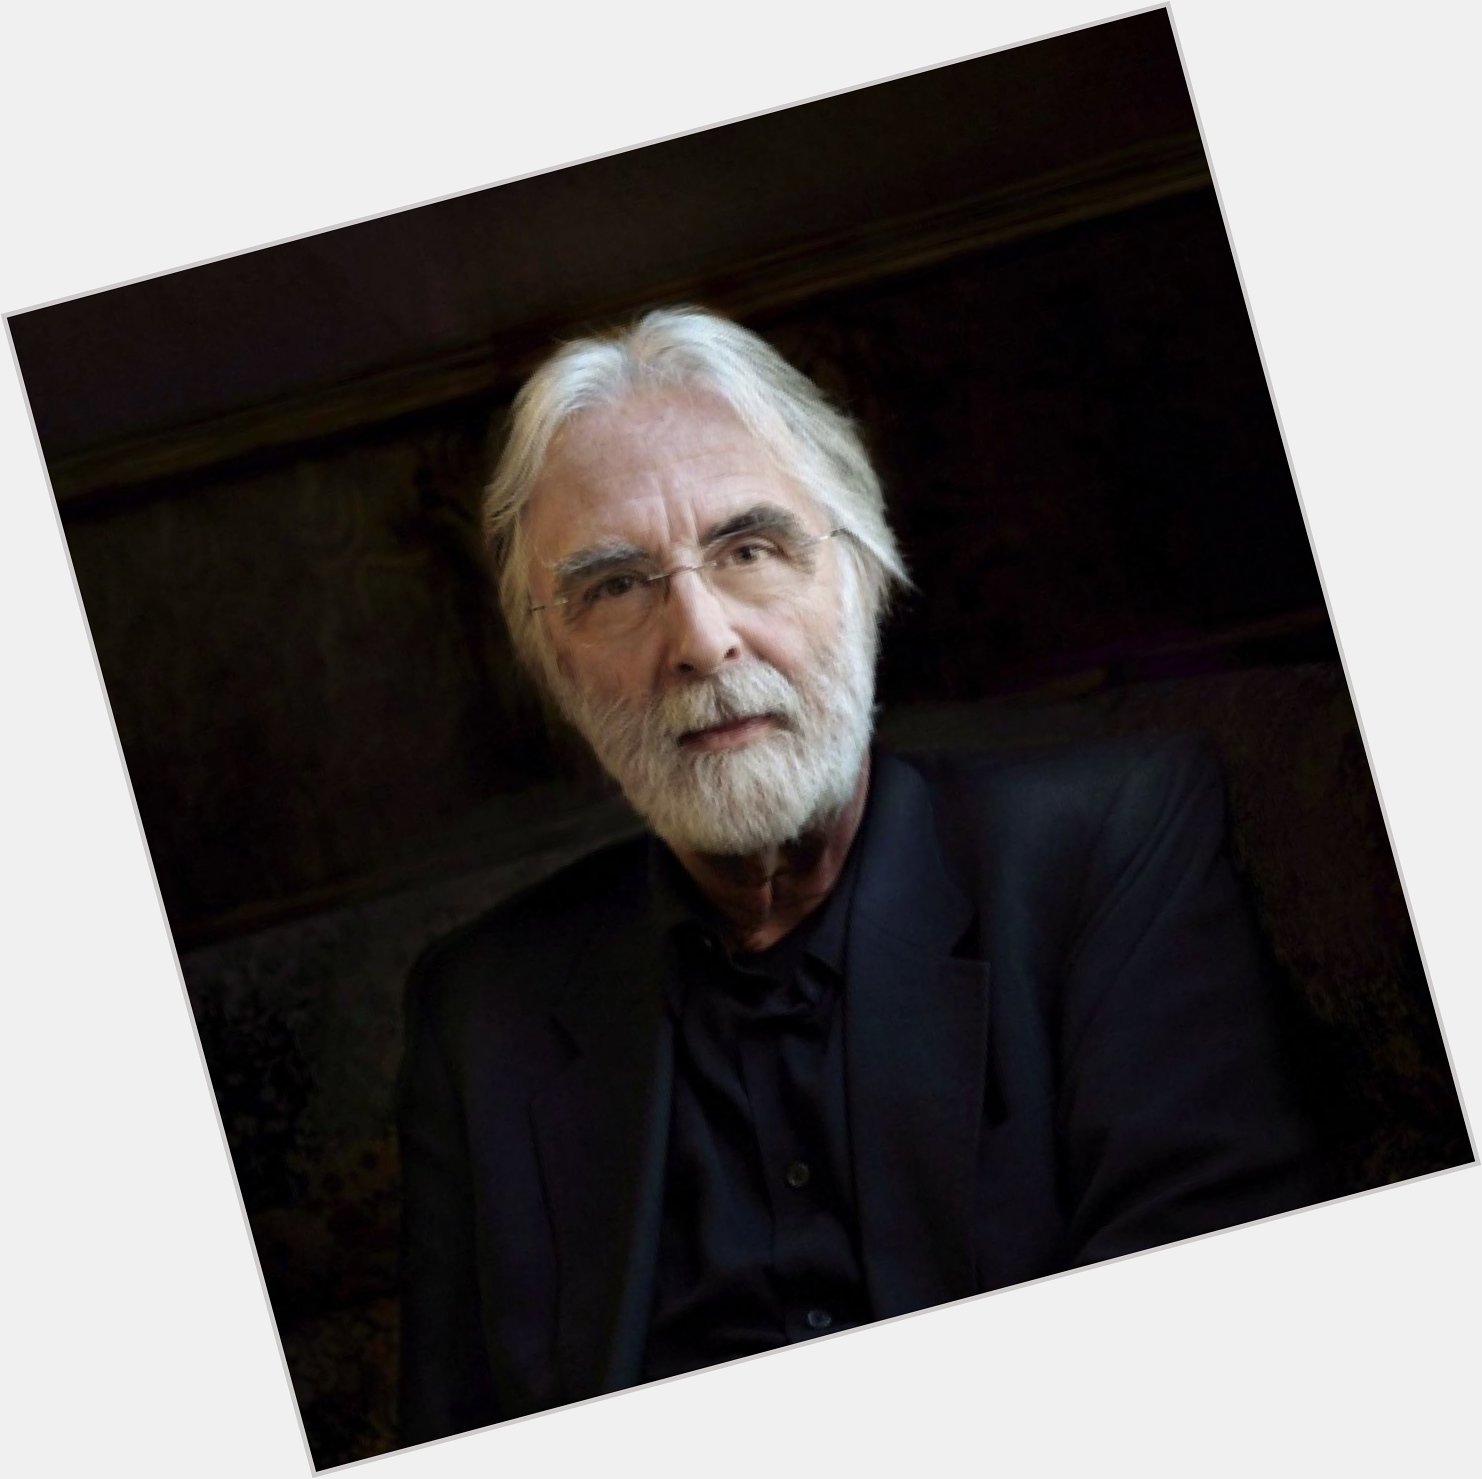 Happy Birthday to my favorite director, Michael Haneke. Thank you for all your incredible work. 